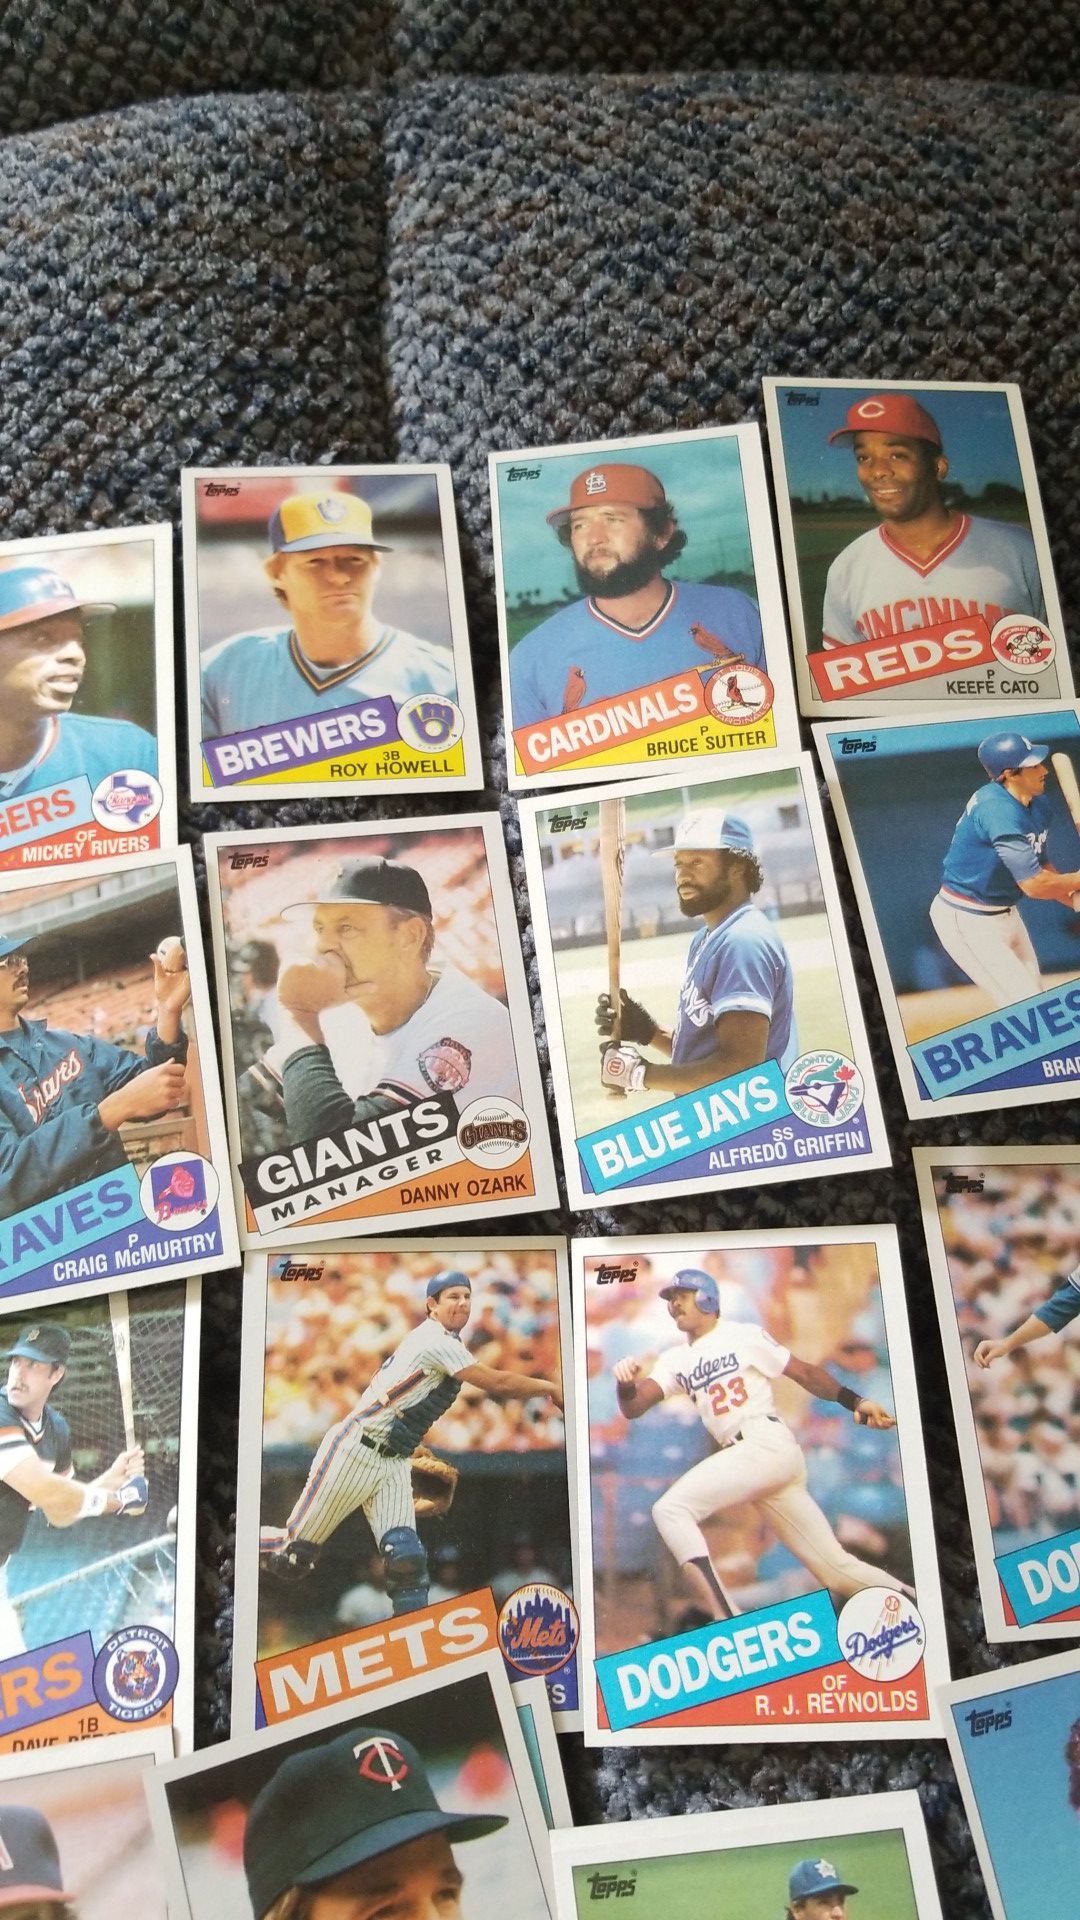 1985 topps baseball cards collection